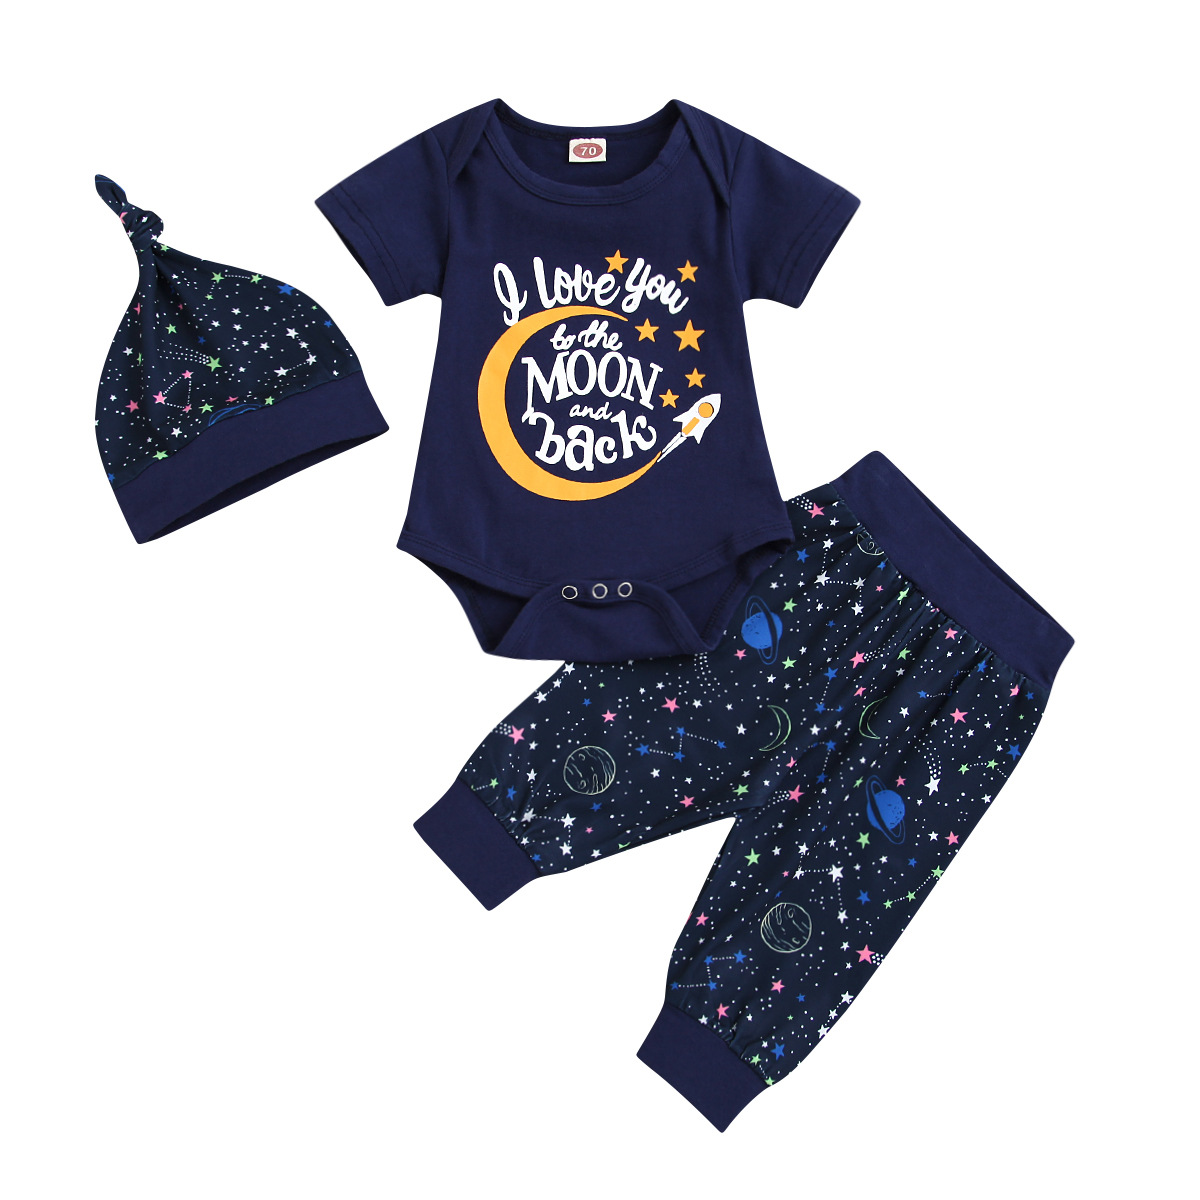 ins foreign trade children's clothing ne...